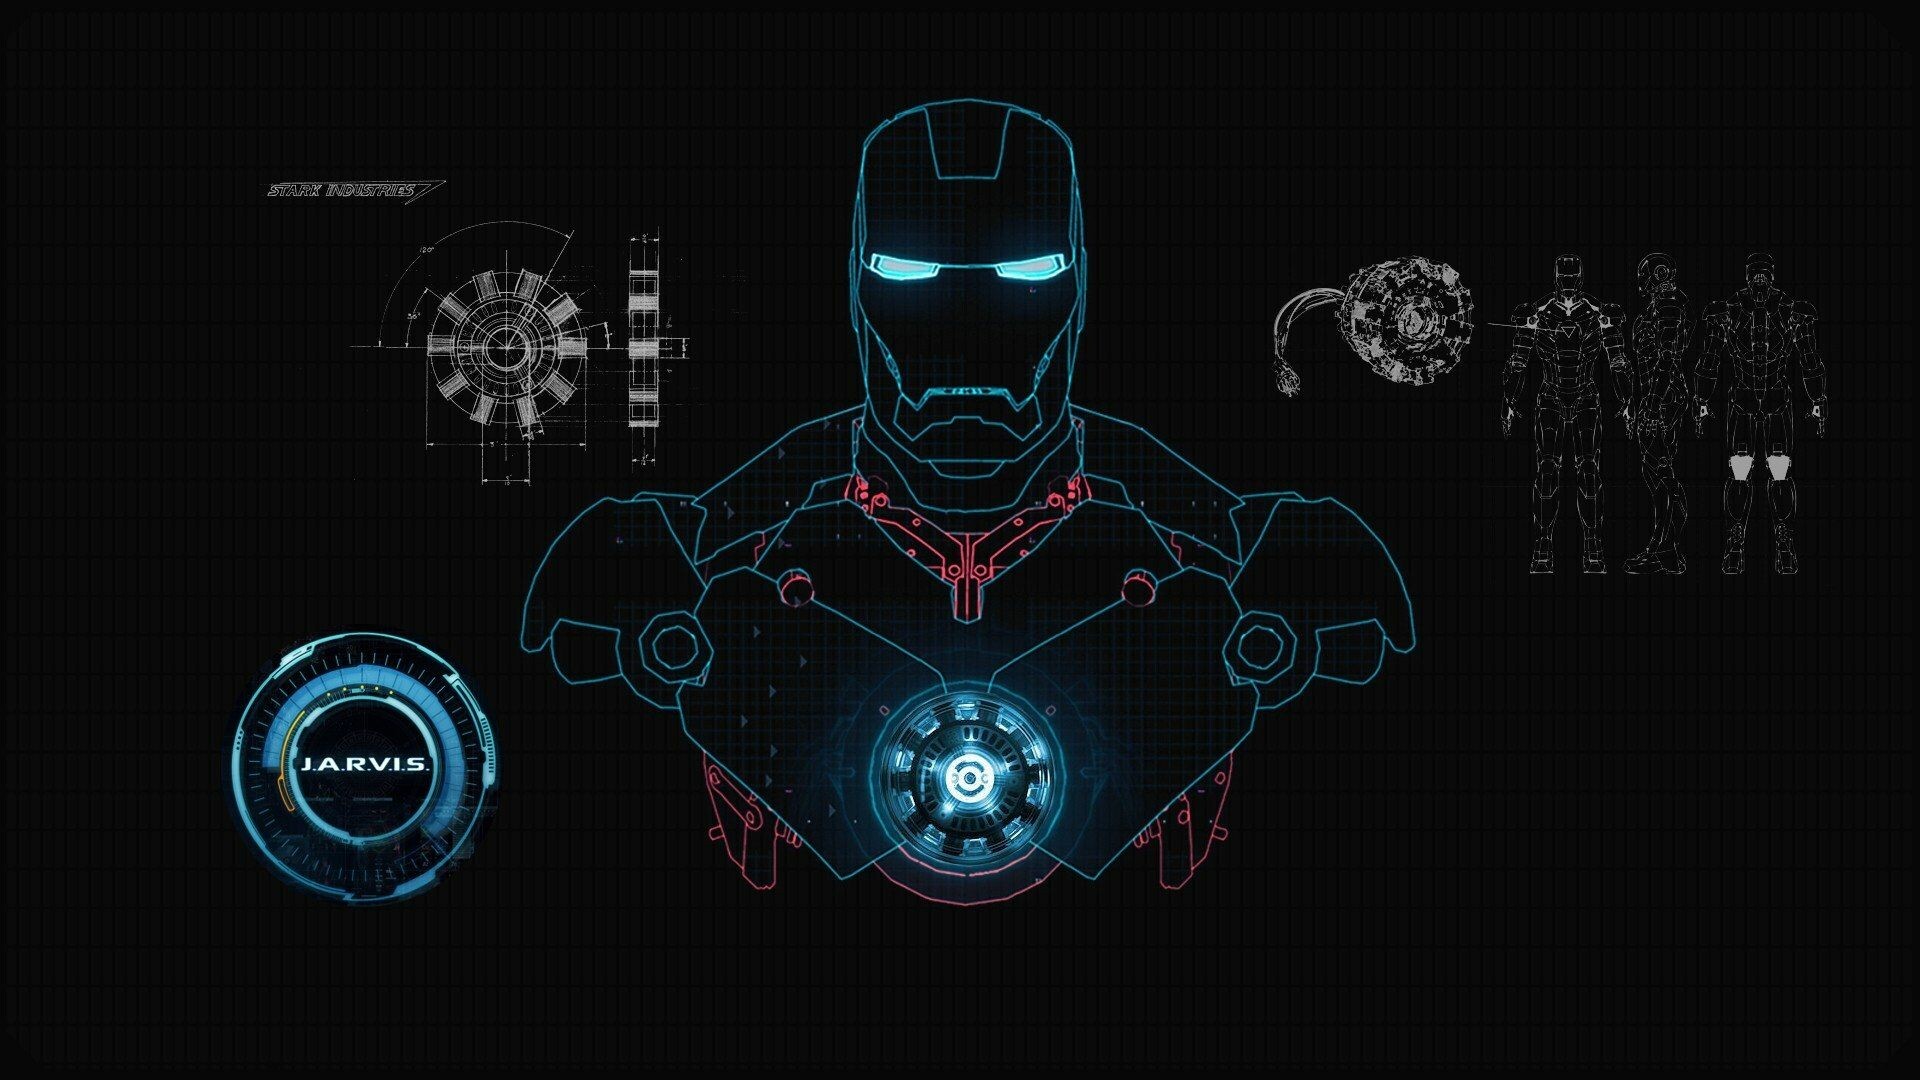 66+ Iron Man Wallpapers: HD, 4K, 5K for PC and Mobile | Download free  images for iPhone, Android